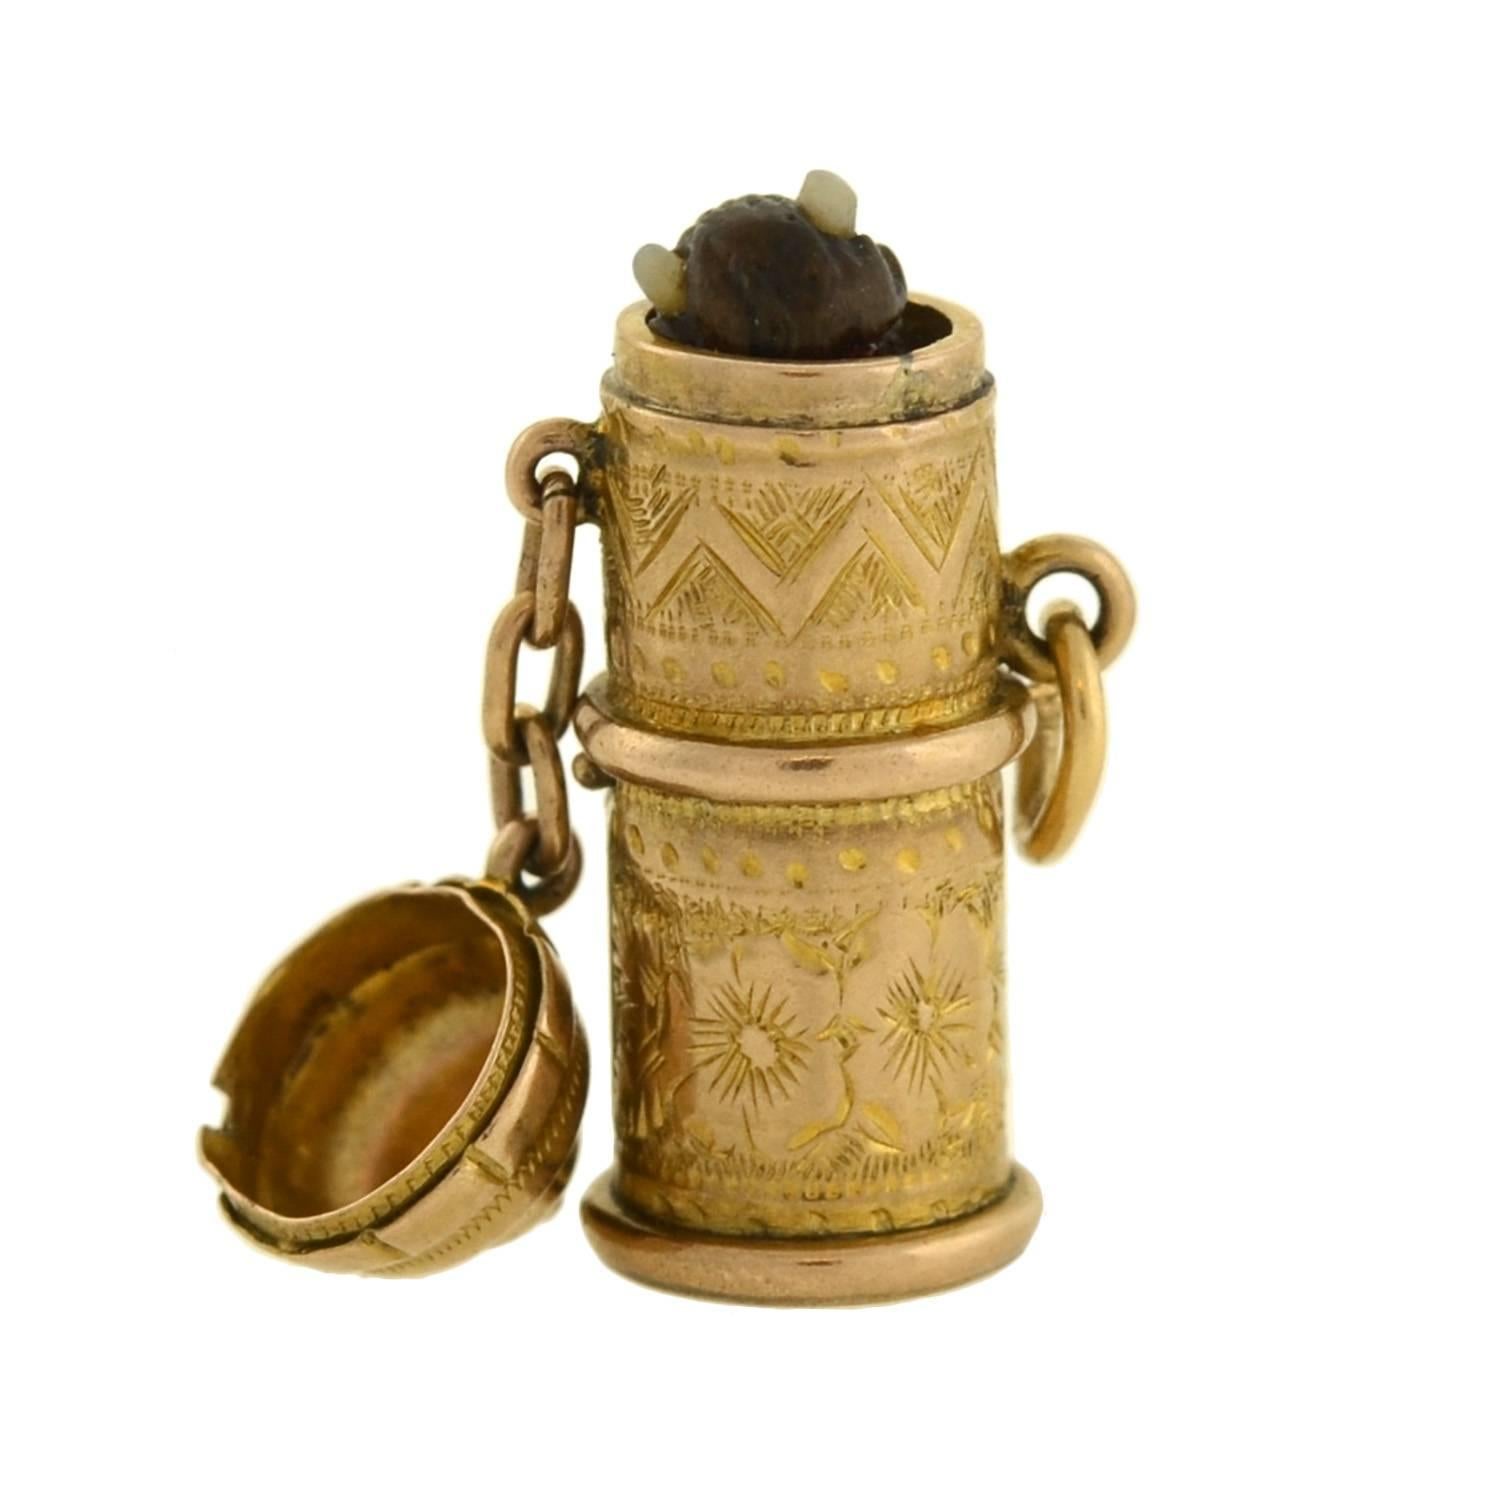 A rare and unusual antique charm from the Victorian (ca1880) era! This collectable piece consists of a 14kt gold capsule, which holds a small devil totem hidden inside. During the Victorian era, many jewelry elements were shrouded in symbolism and